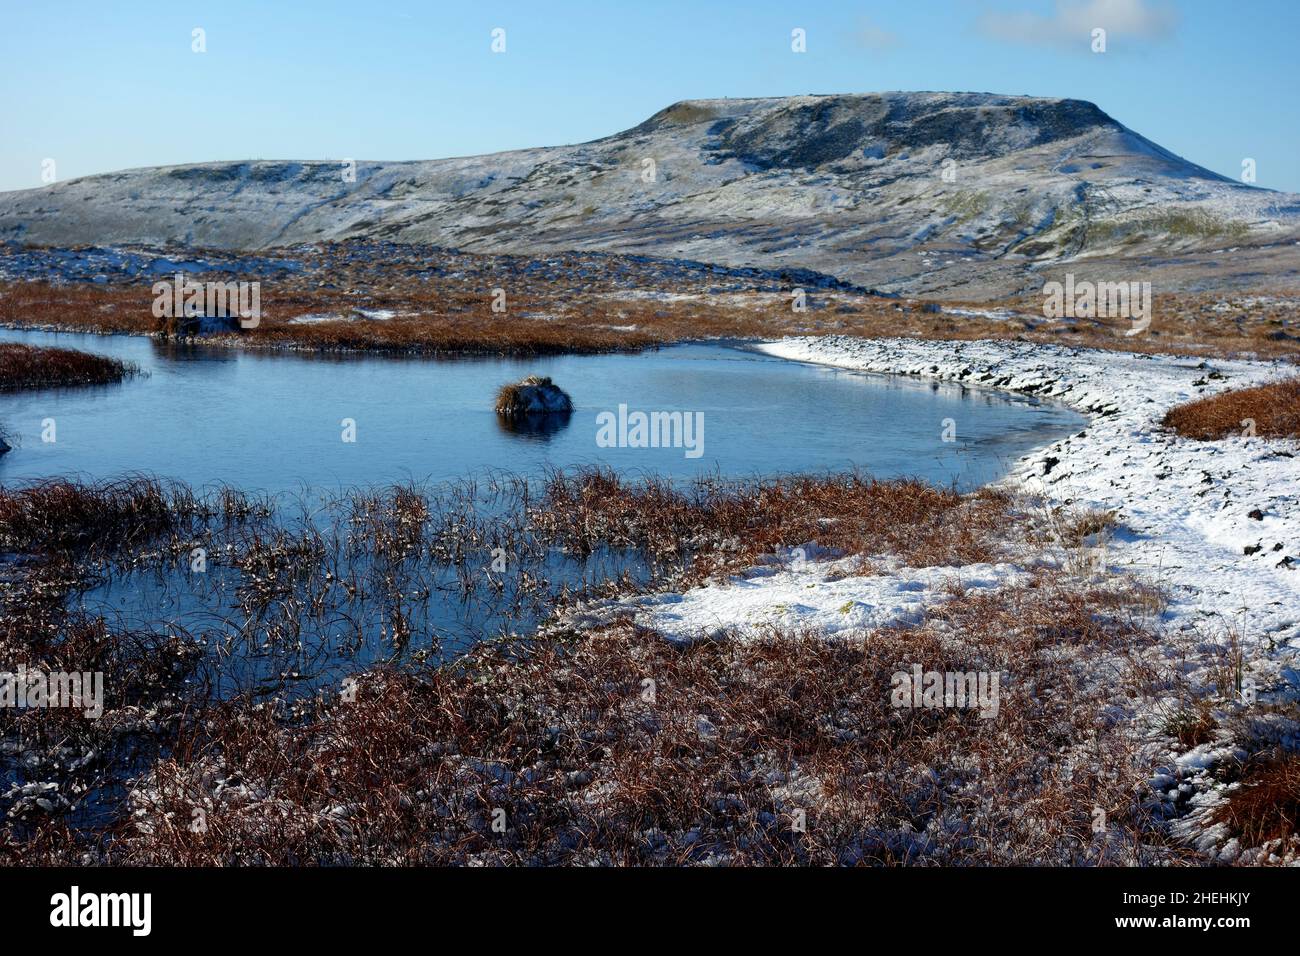 The Icy Summit Ingleborough (1 of the Yorkshire 3 Peaks) from a Frozen Tarn near the Path on Simon Fell, Yorkshire Dales National Park, England, UK. Stock Photo